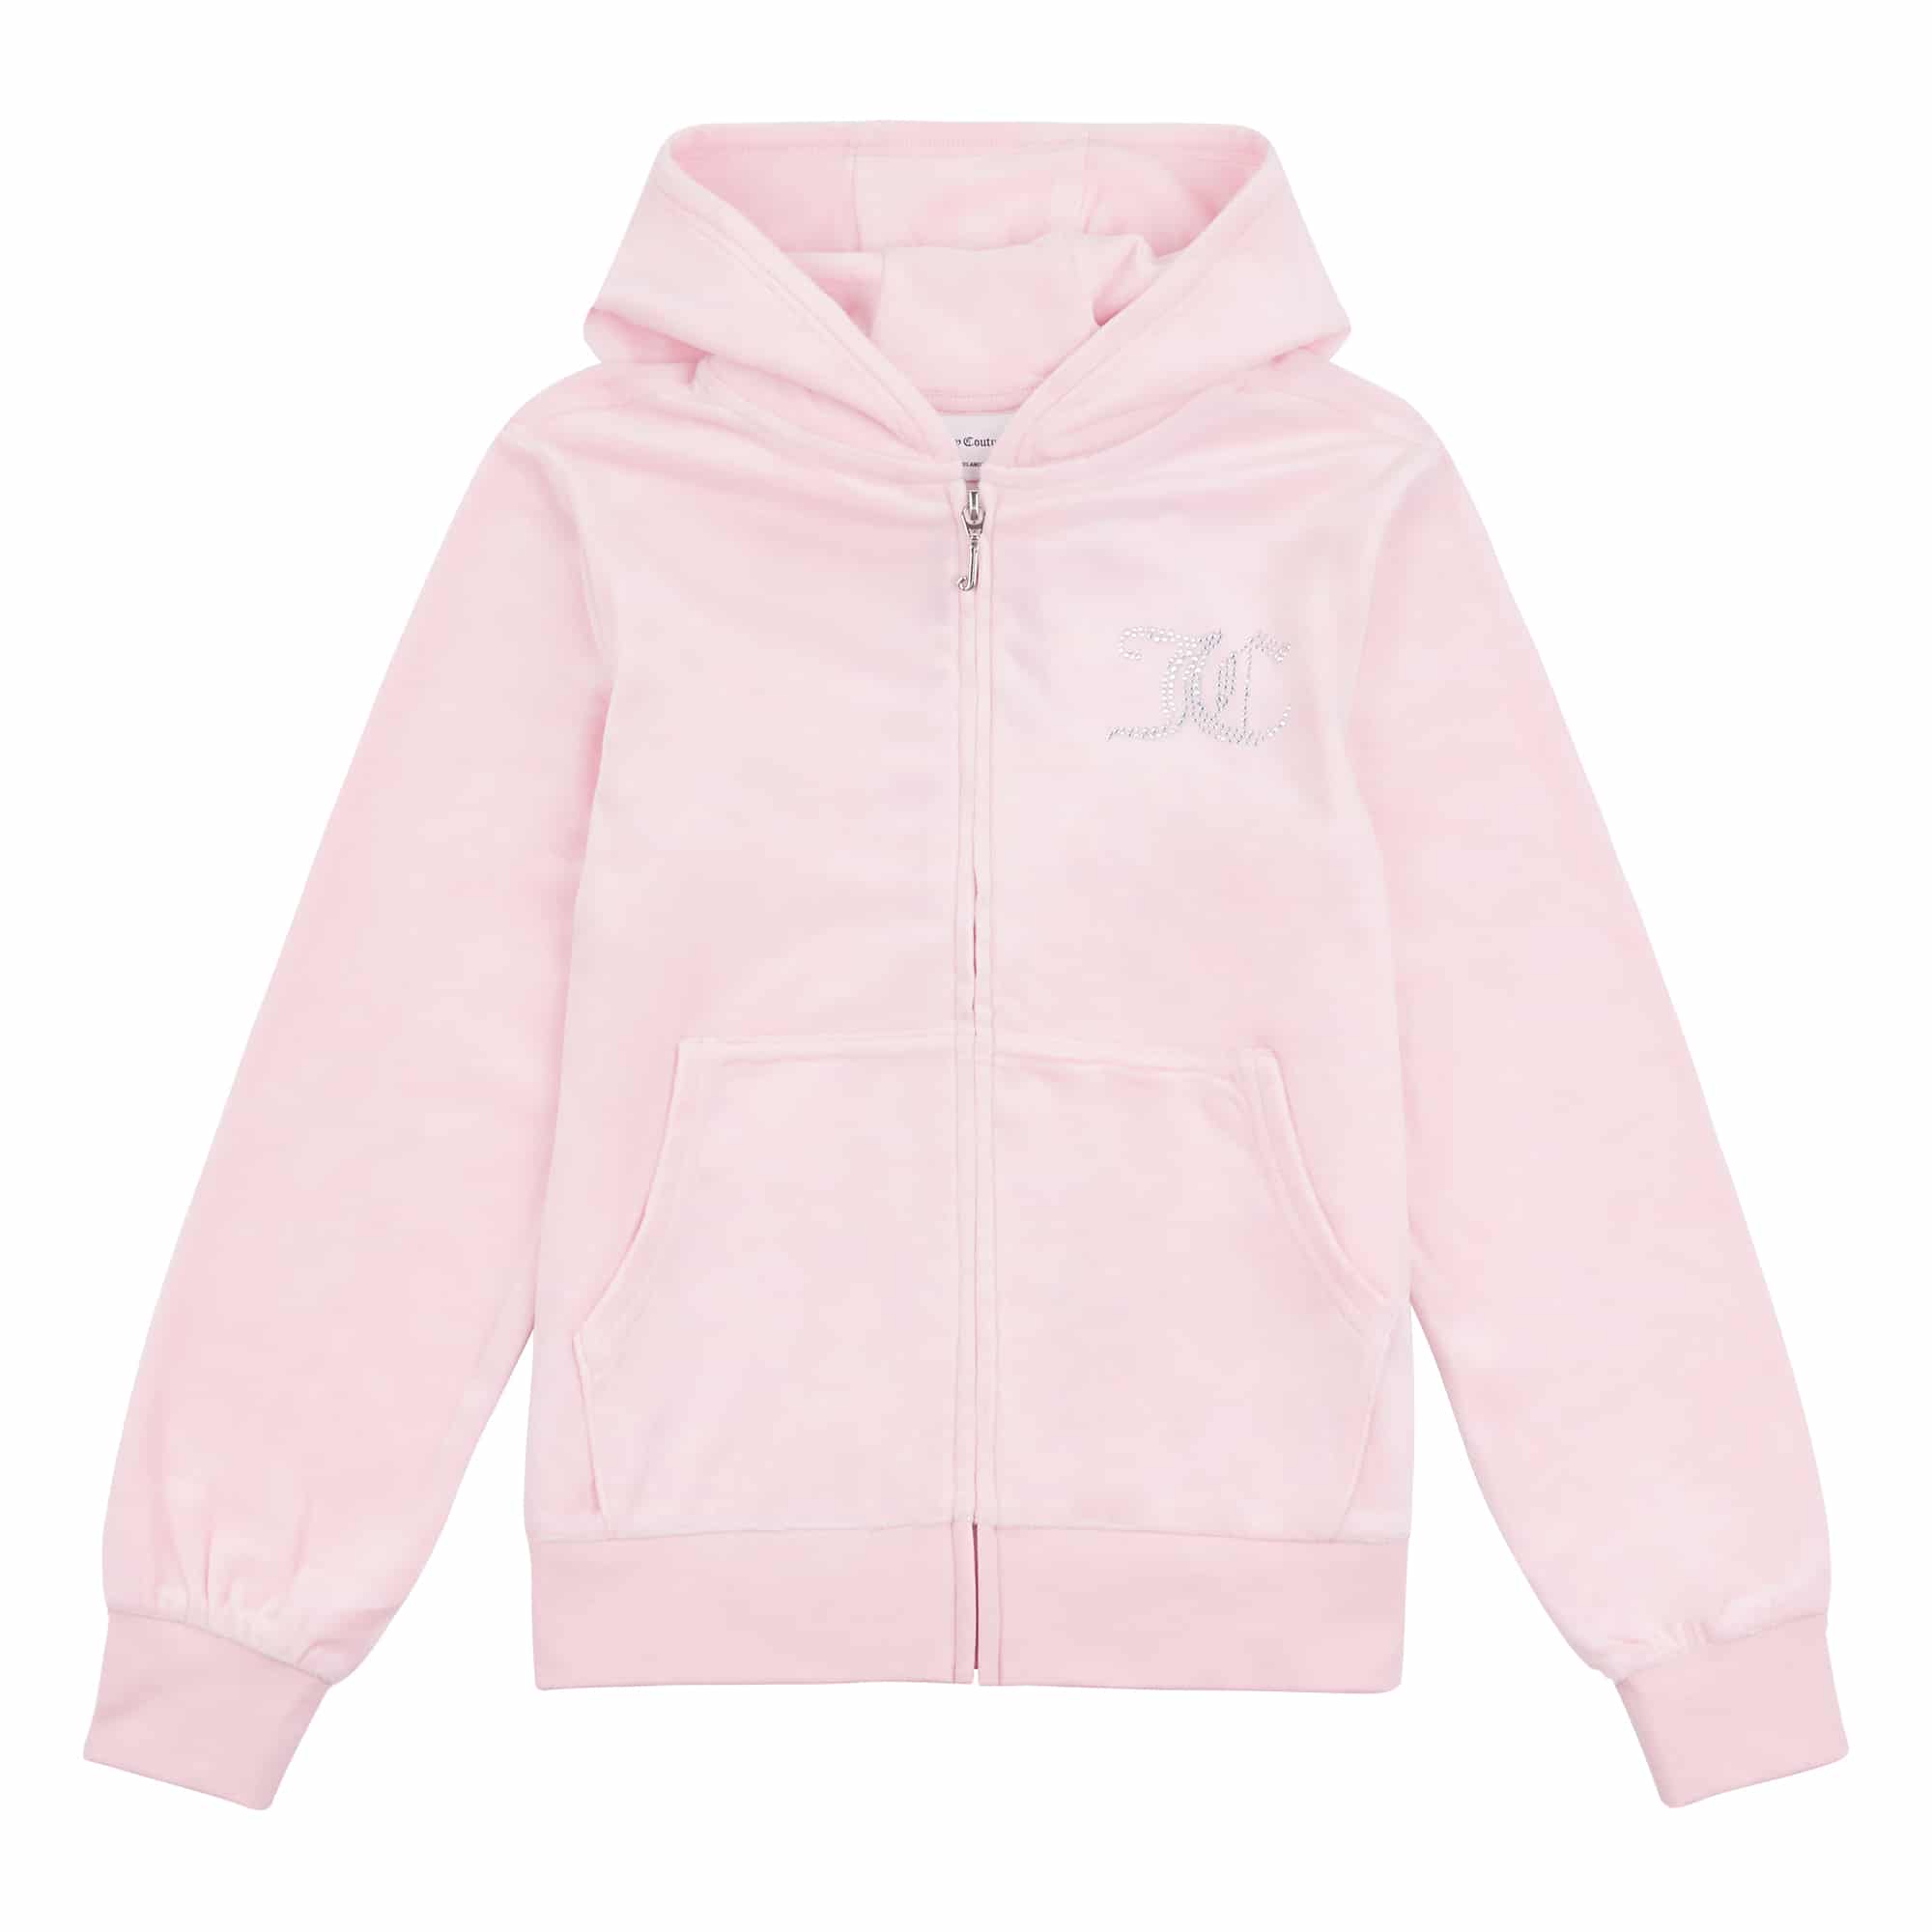 Juicy Couture girls pale pink velour tracksuit hooded top front view